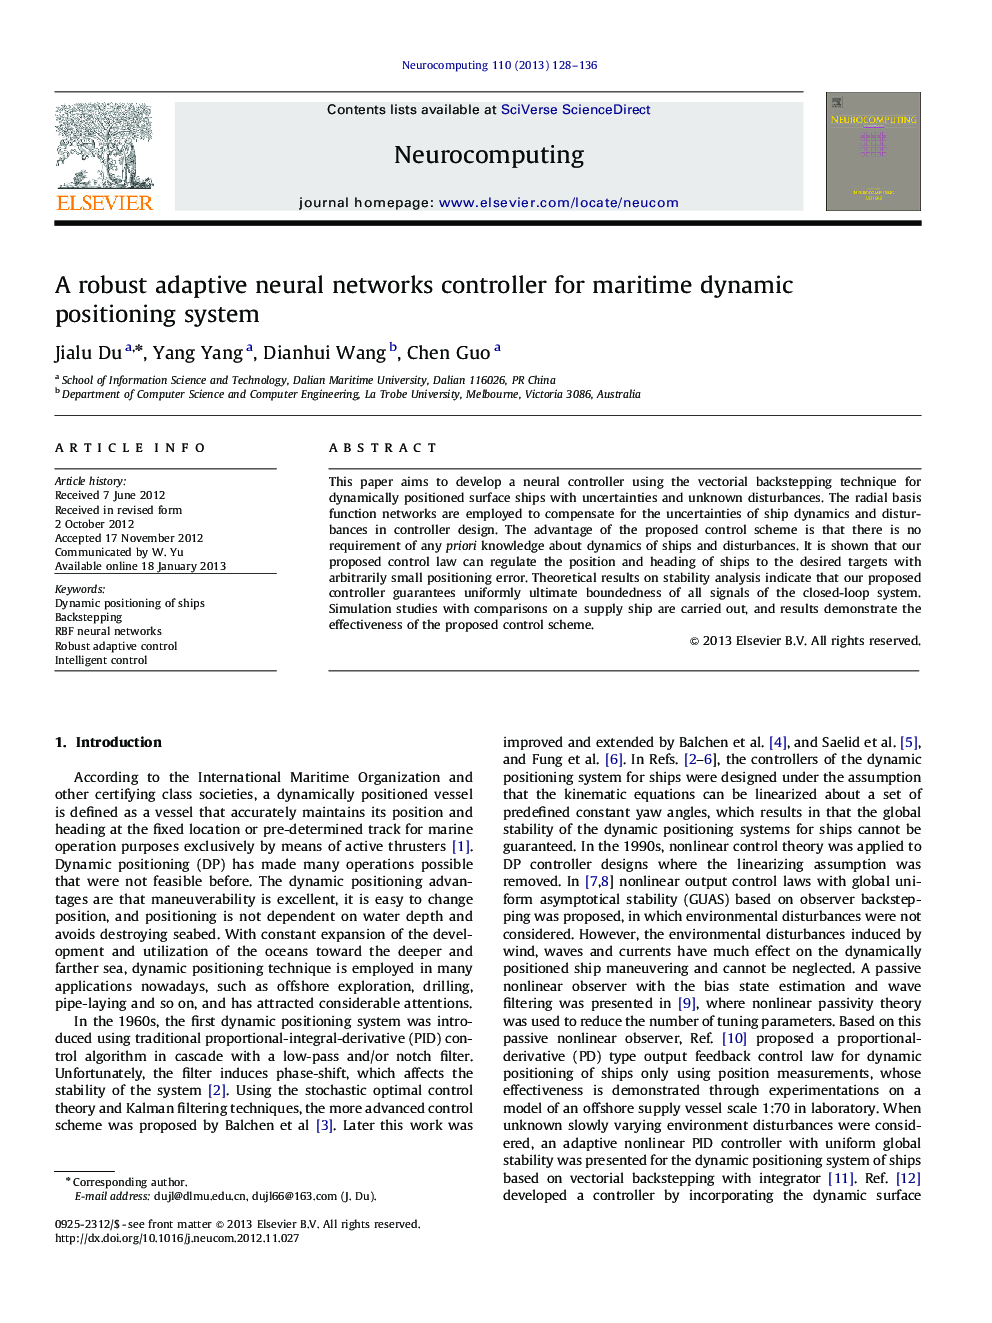 A robust adaptive neural networks controller for maritime dynamic positioning system